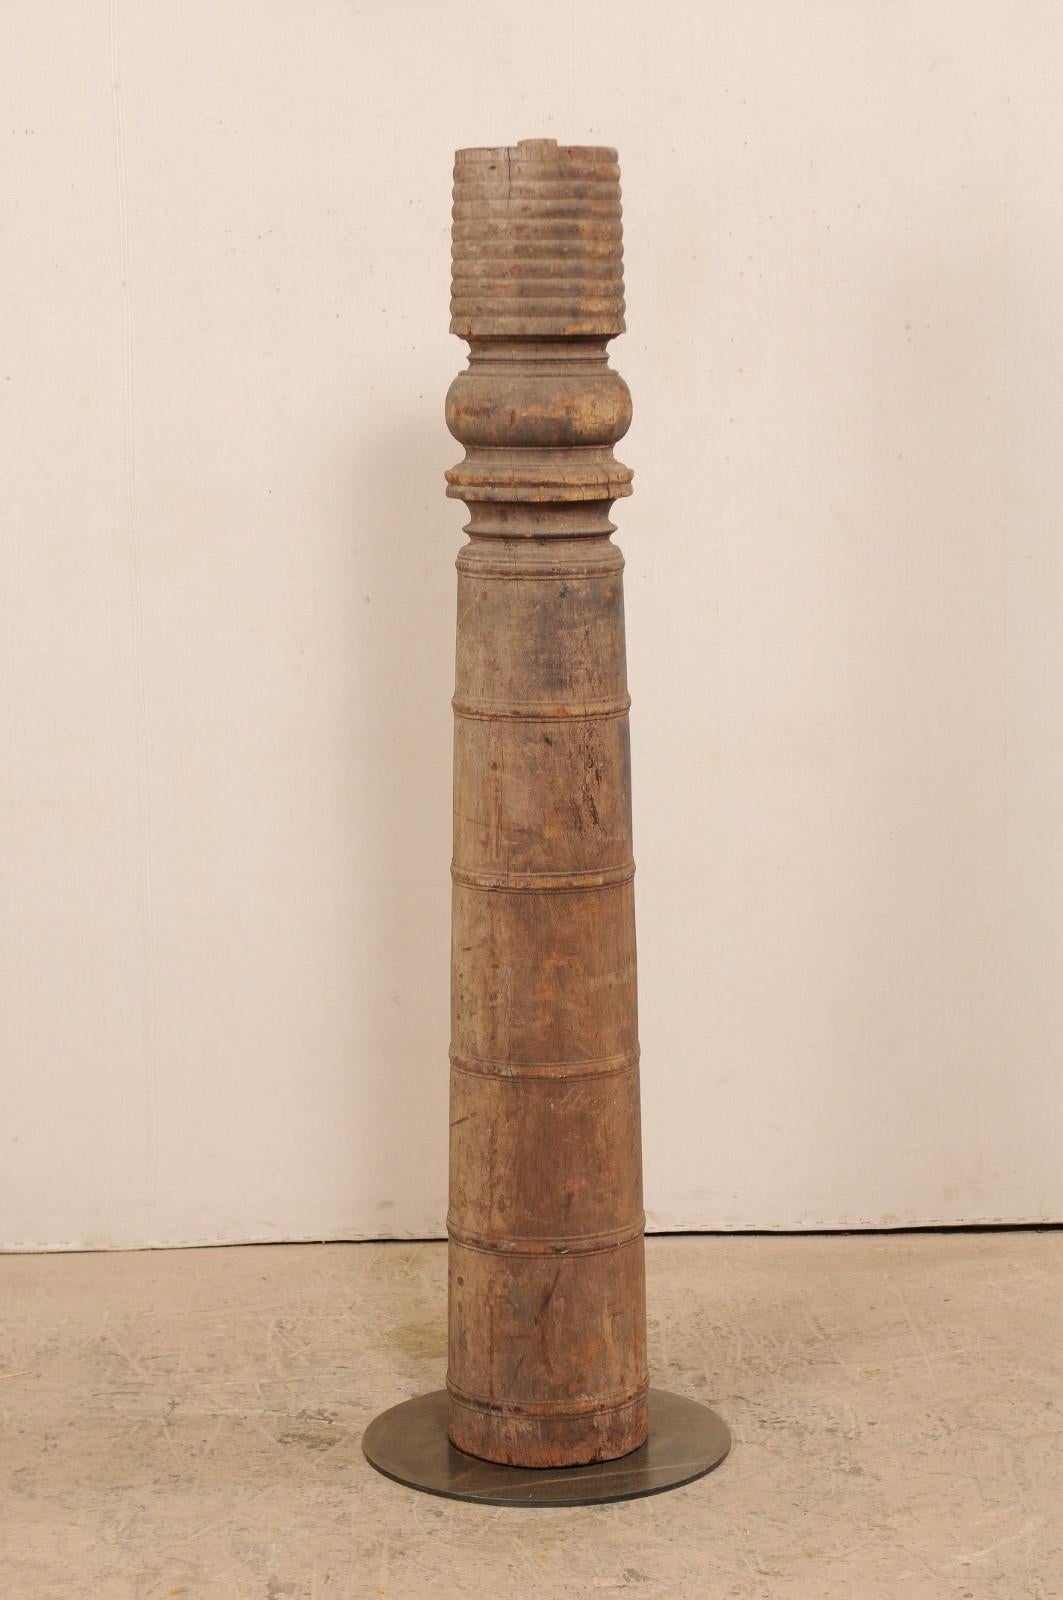 A single 19th century British Colonial carved wood column with custom stand. This antique hand carved wooden architectural element from India, which stands just over 5.5 feet in height, features a rounded column adorn with a series of carved rings